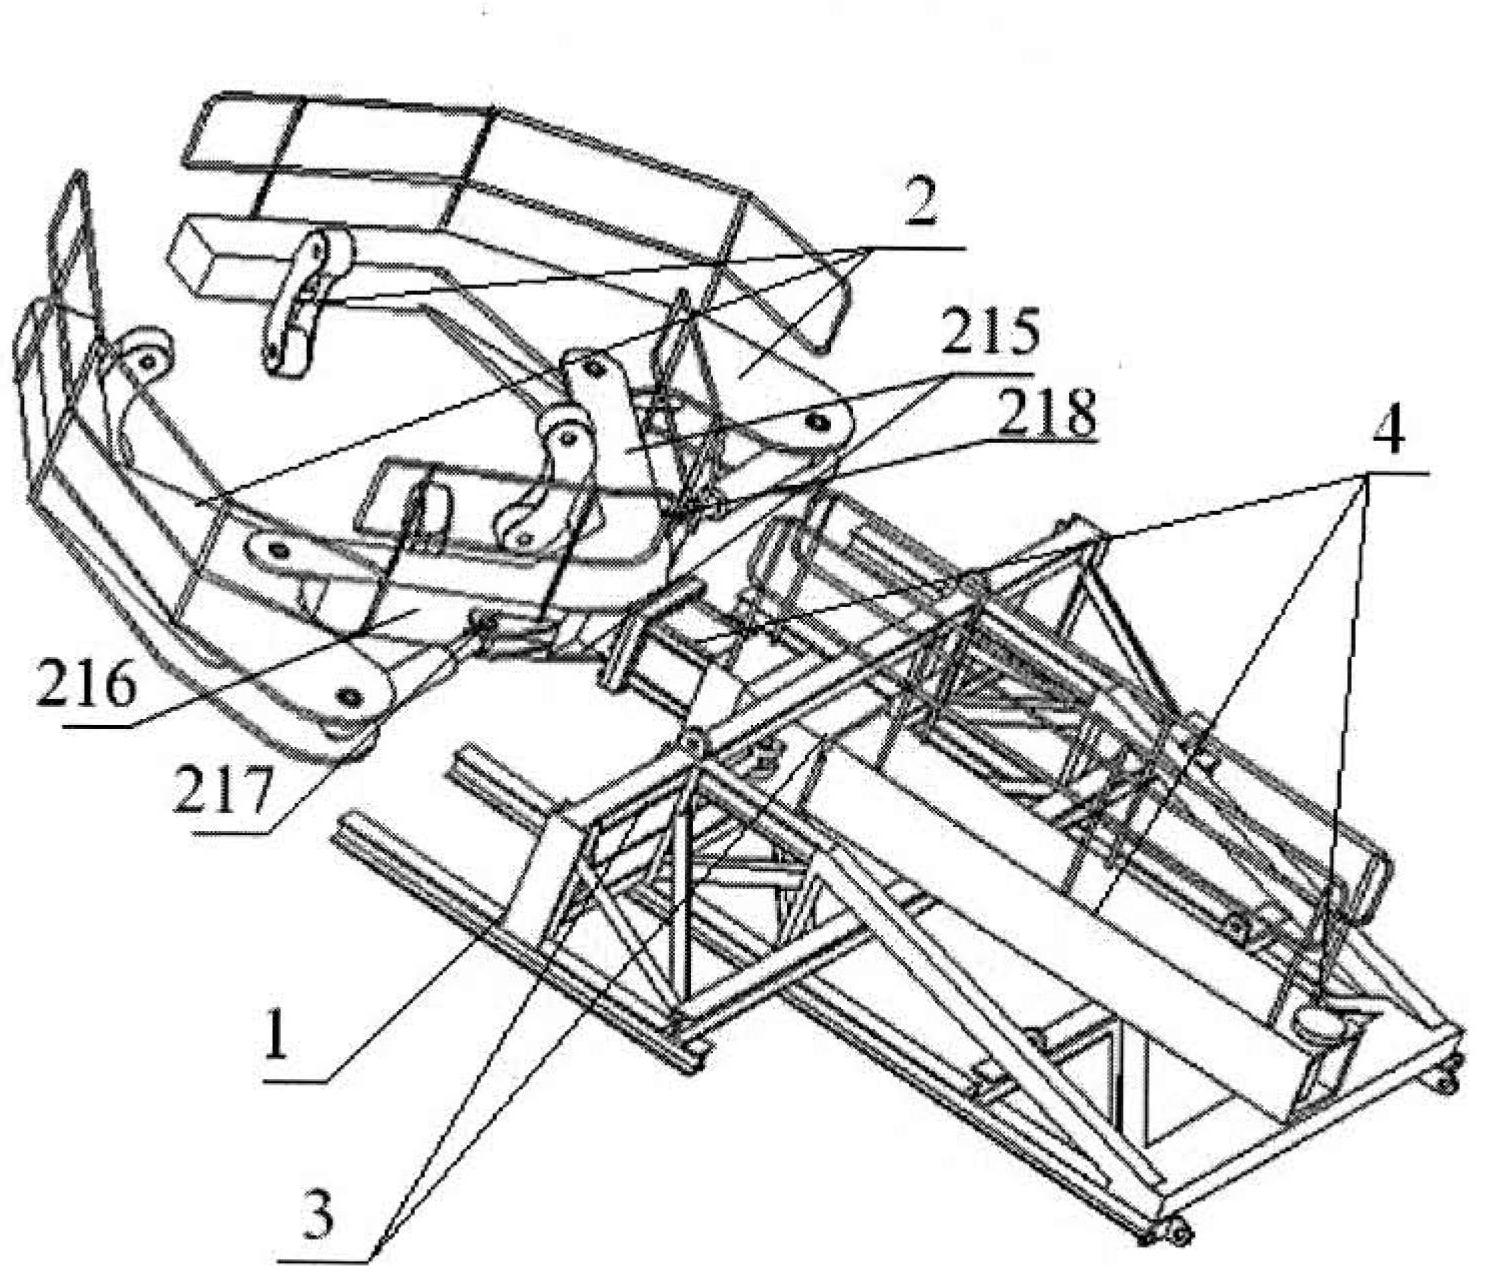 Guiding centralizer mechanism for single-pile foundation of offshore wind turbine